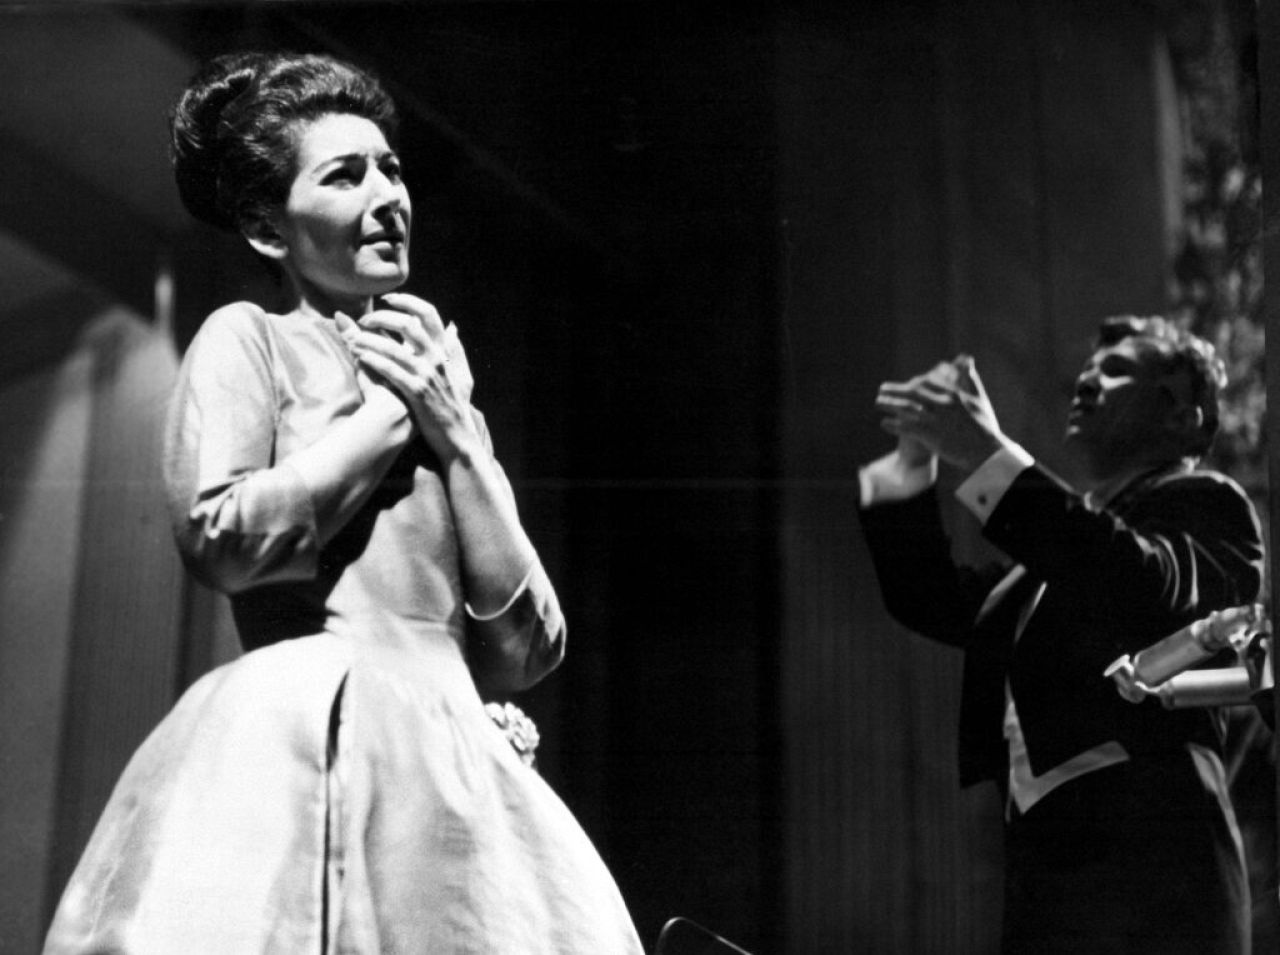 Callas sings at the Theater de Champs Elysees in Paris, France, under the direction of Maestro Georges Pretre, June 5, 1963.